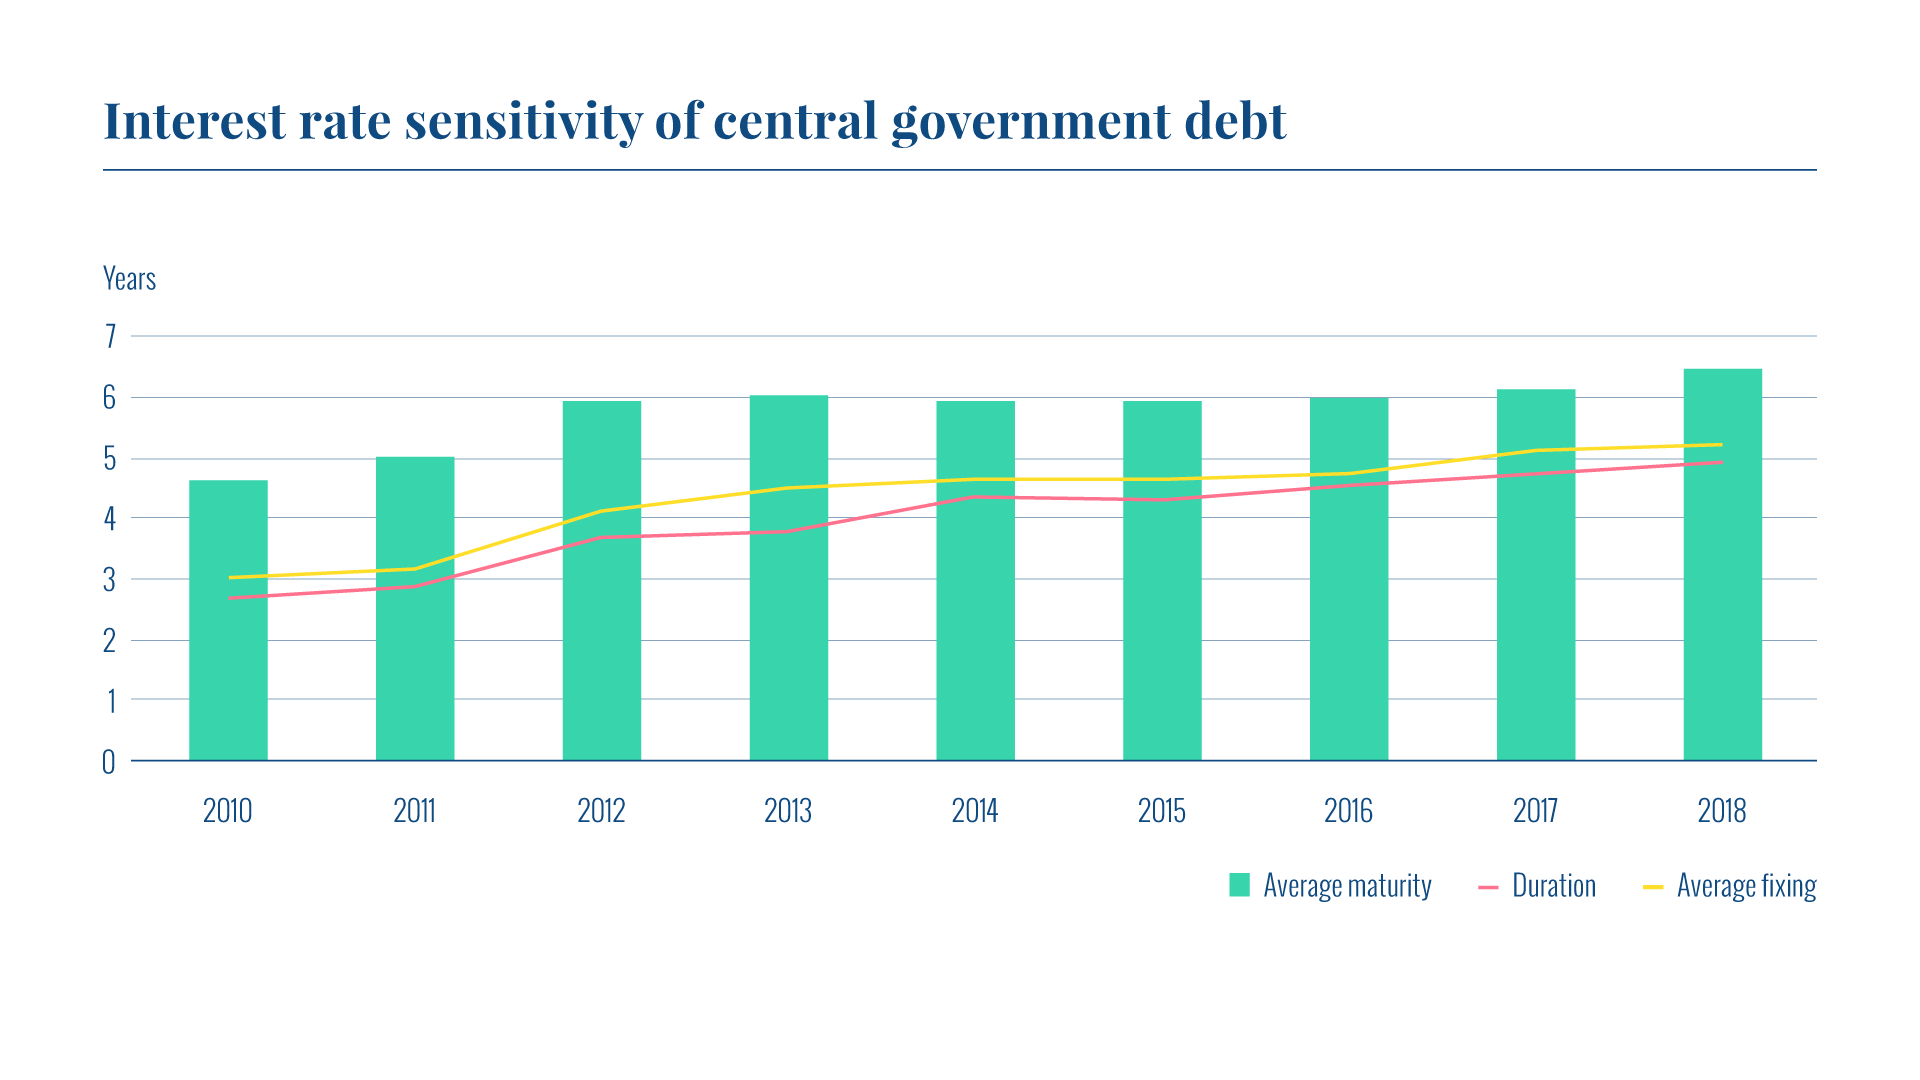 The graph presents key figures on the interest rate sensitivity of central government debt. At the end of 2018, the average fixing of the central government debt was 5.22 years and duration 4.94 years. The average maturity was 6.46 years.